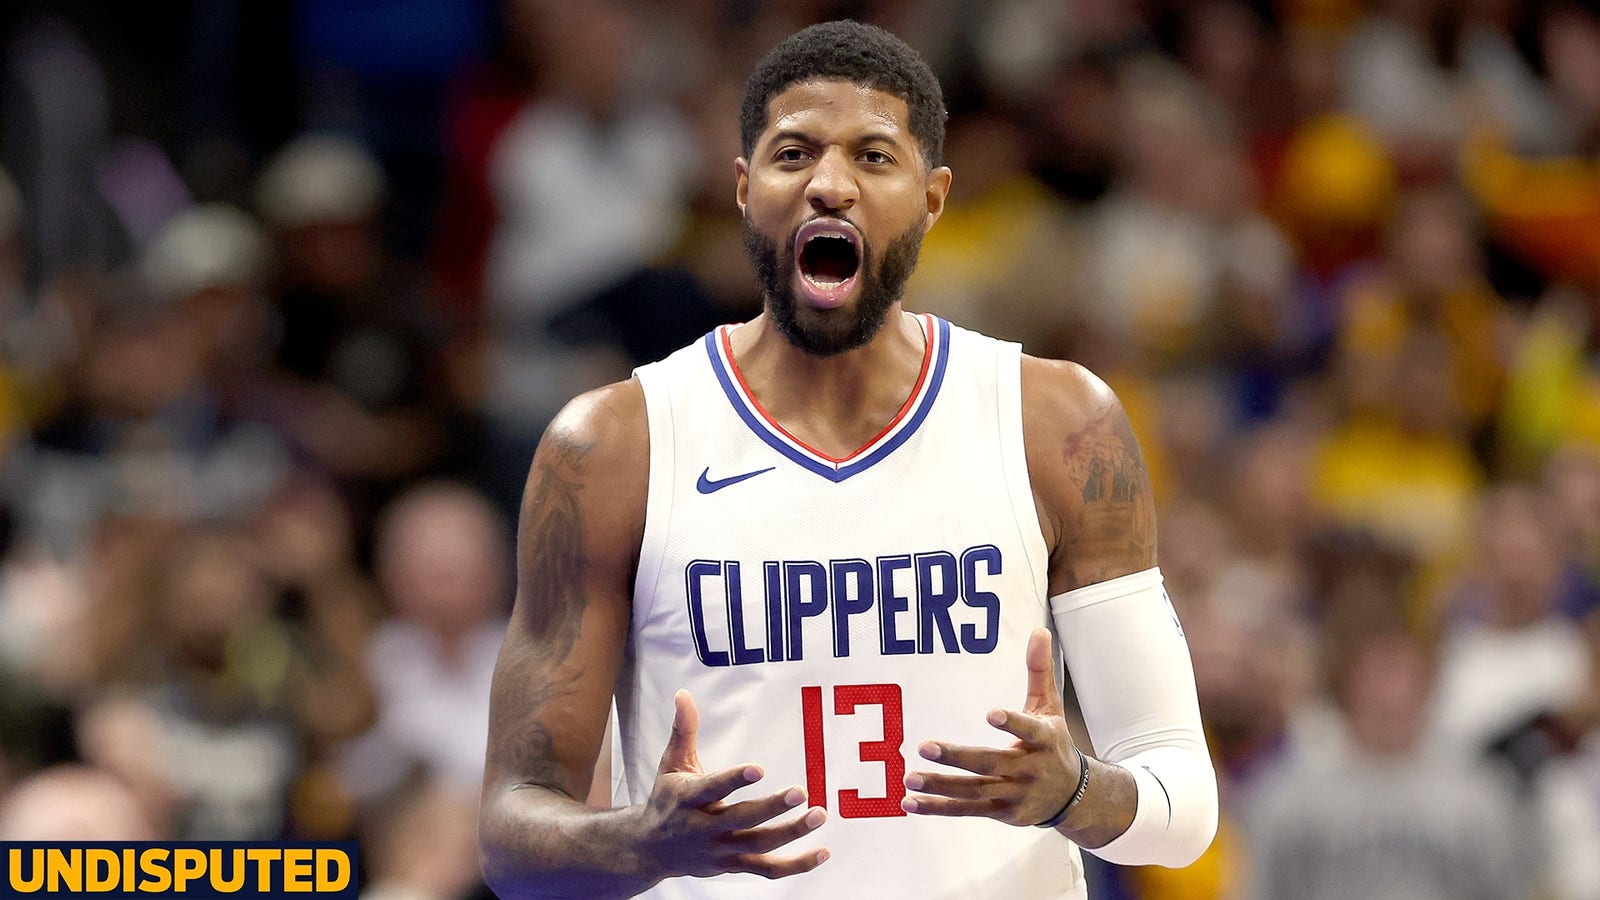 Nuggets beat Clippers: LAC has lost six straight since acquiring Harden